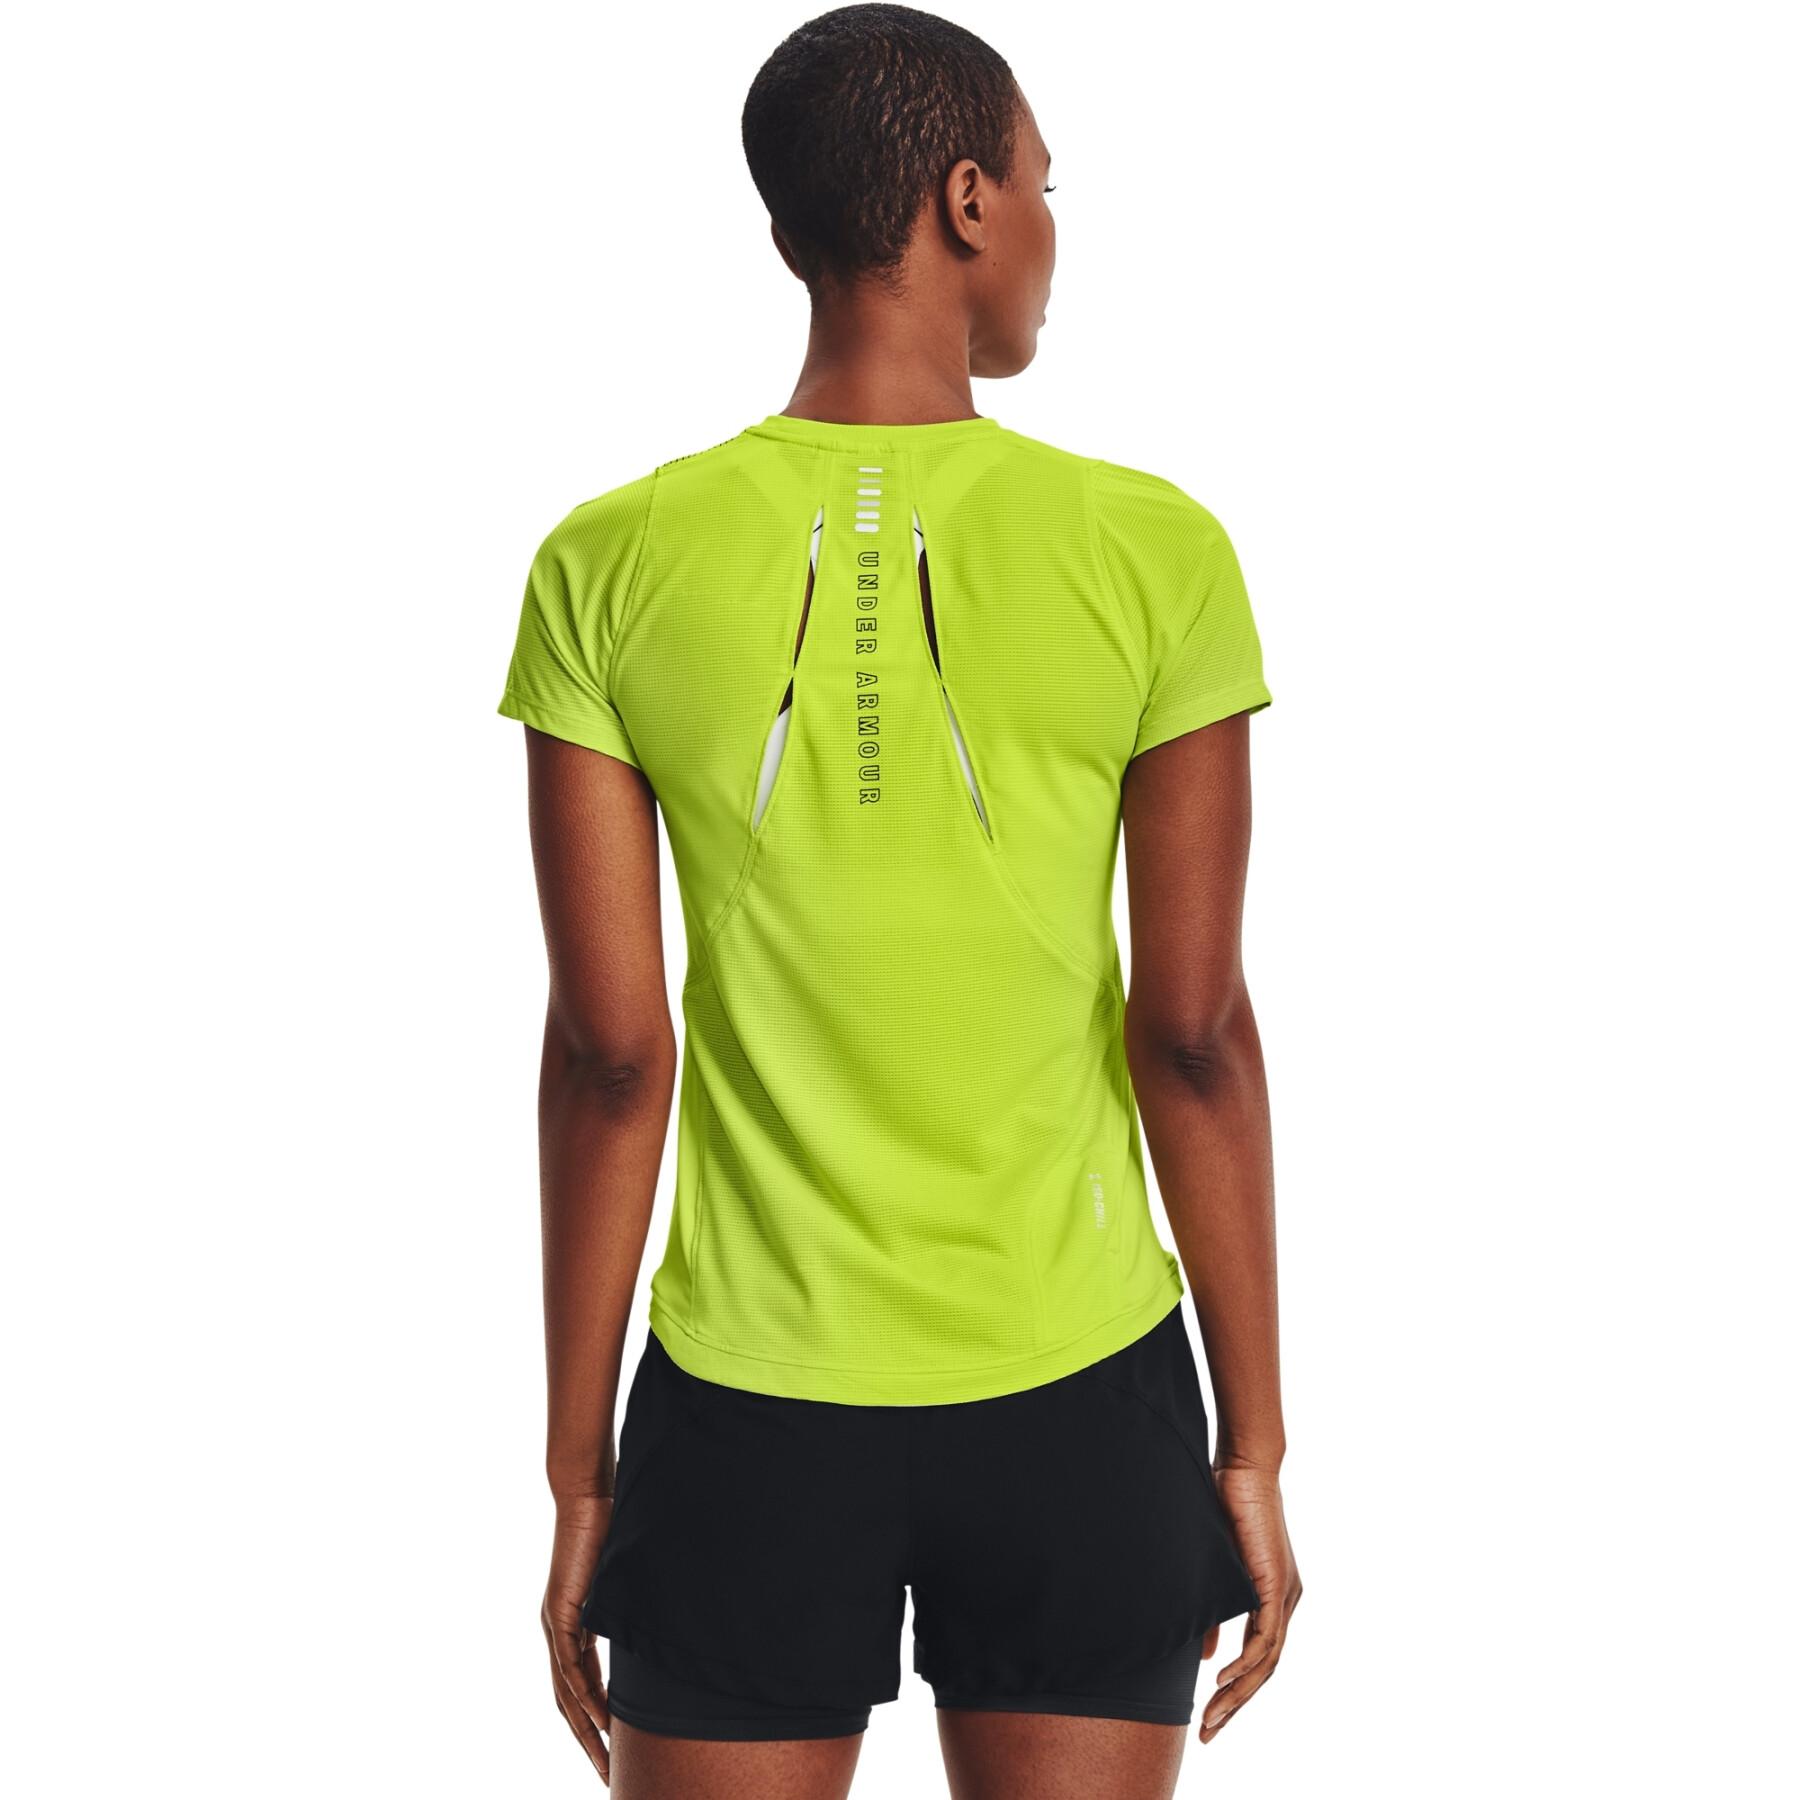 Women's jersey Under Armour Qualifier Iso-Chill